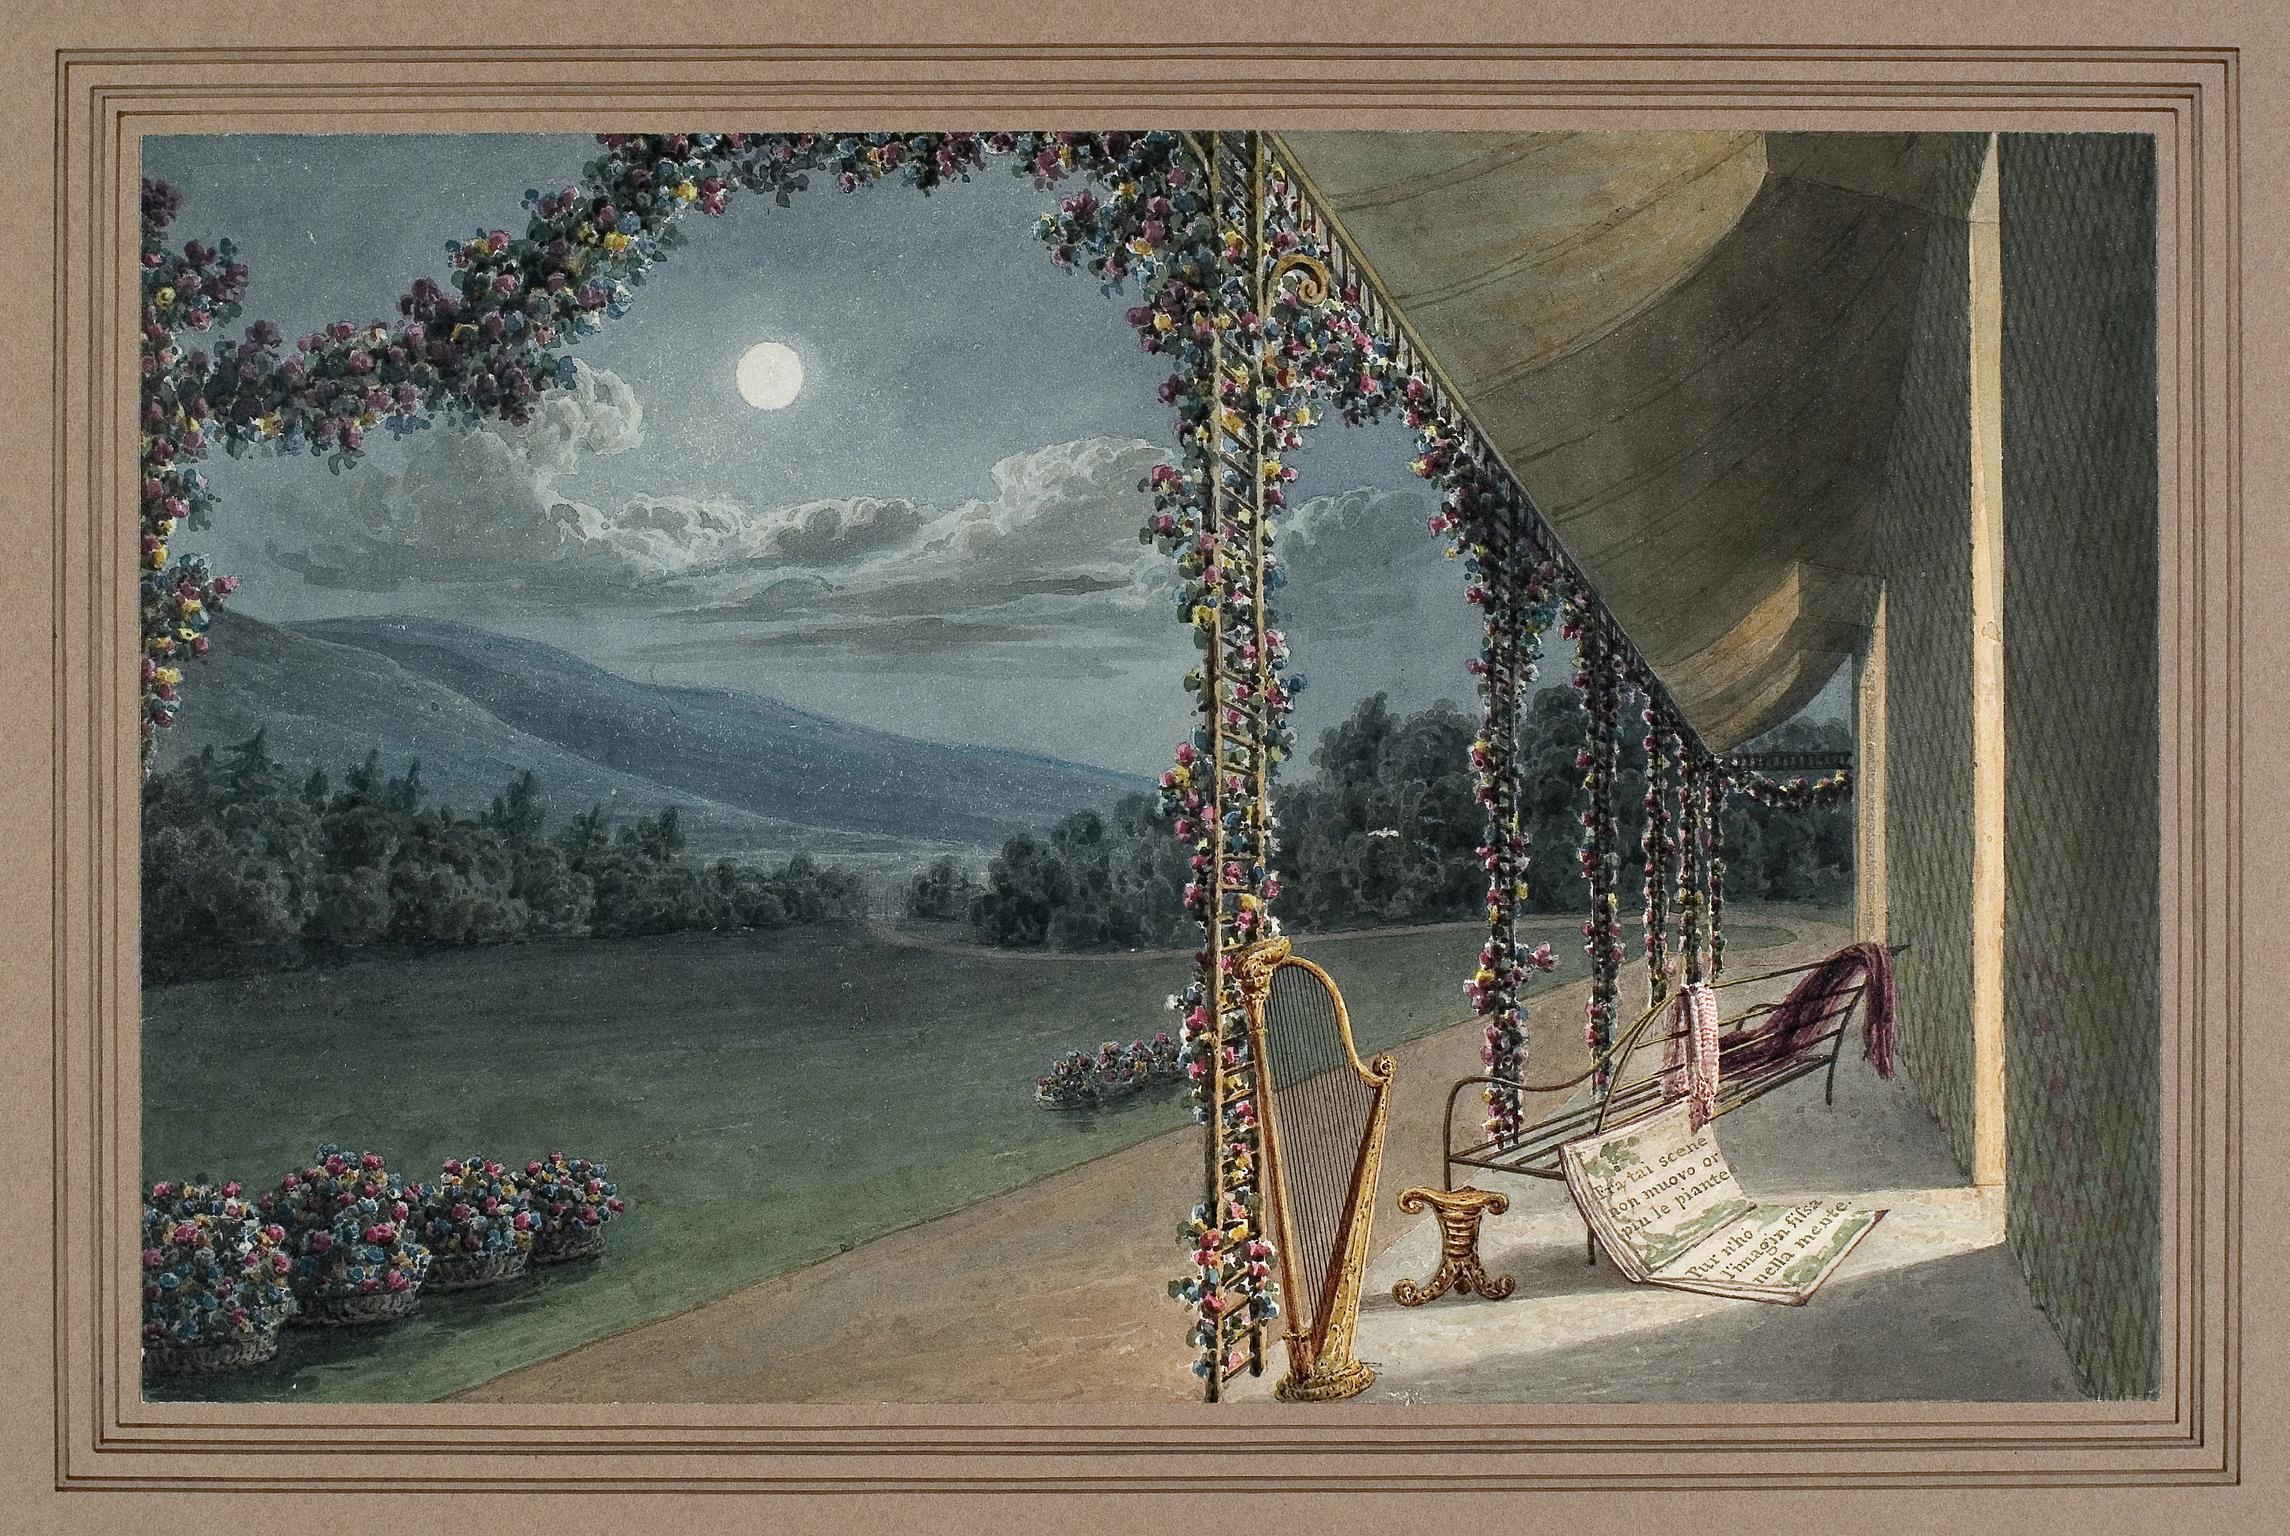 Rheola, Scene from the Drawing Room